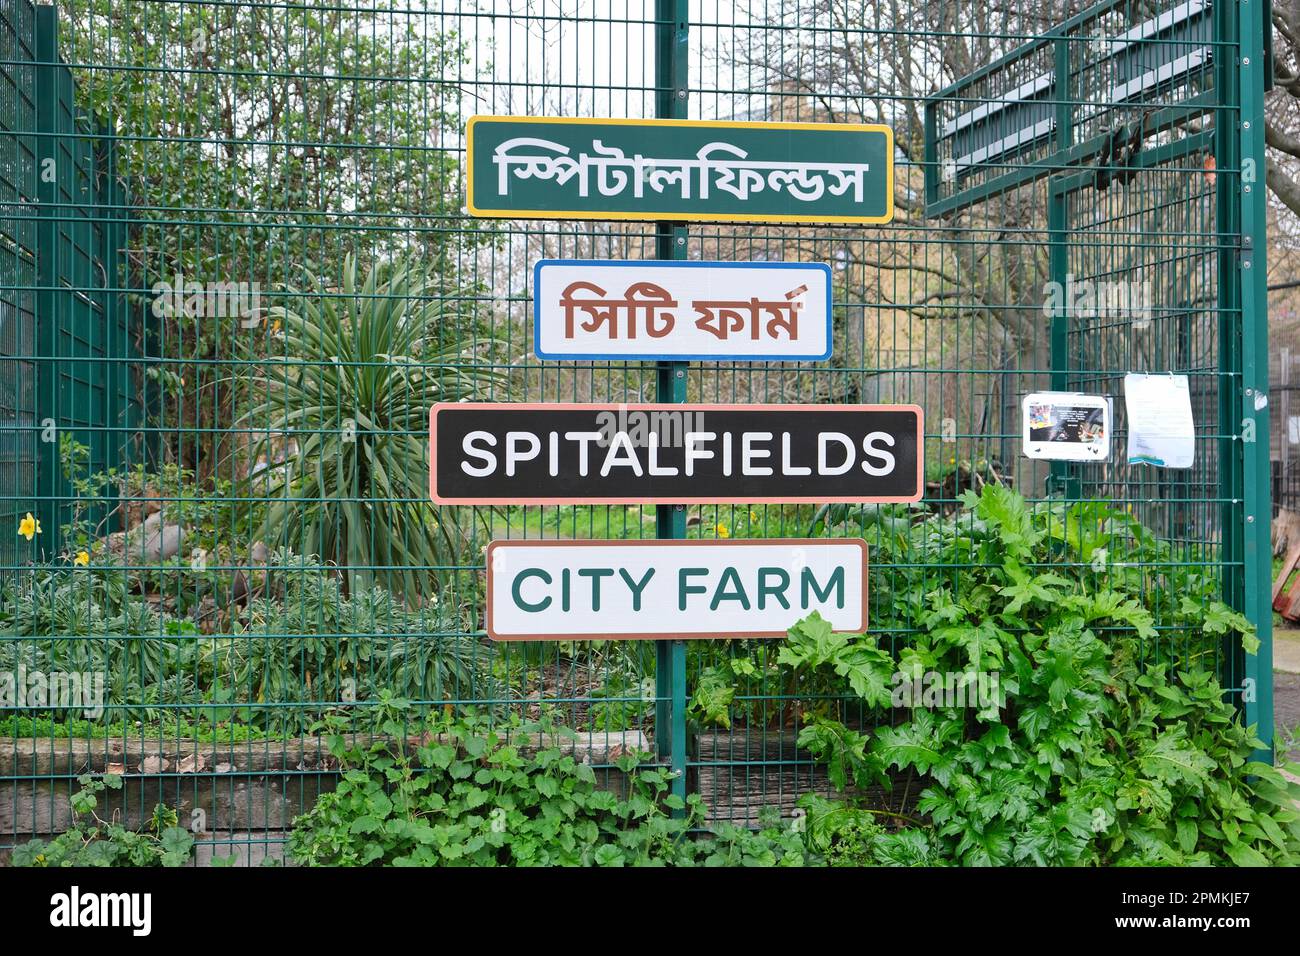 A sign at the entrance of Spitalfields City Farm in English and Bengali, the heart of London's Bengali community. Stock Photo